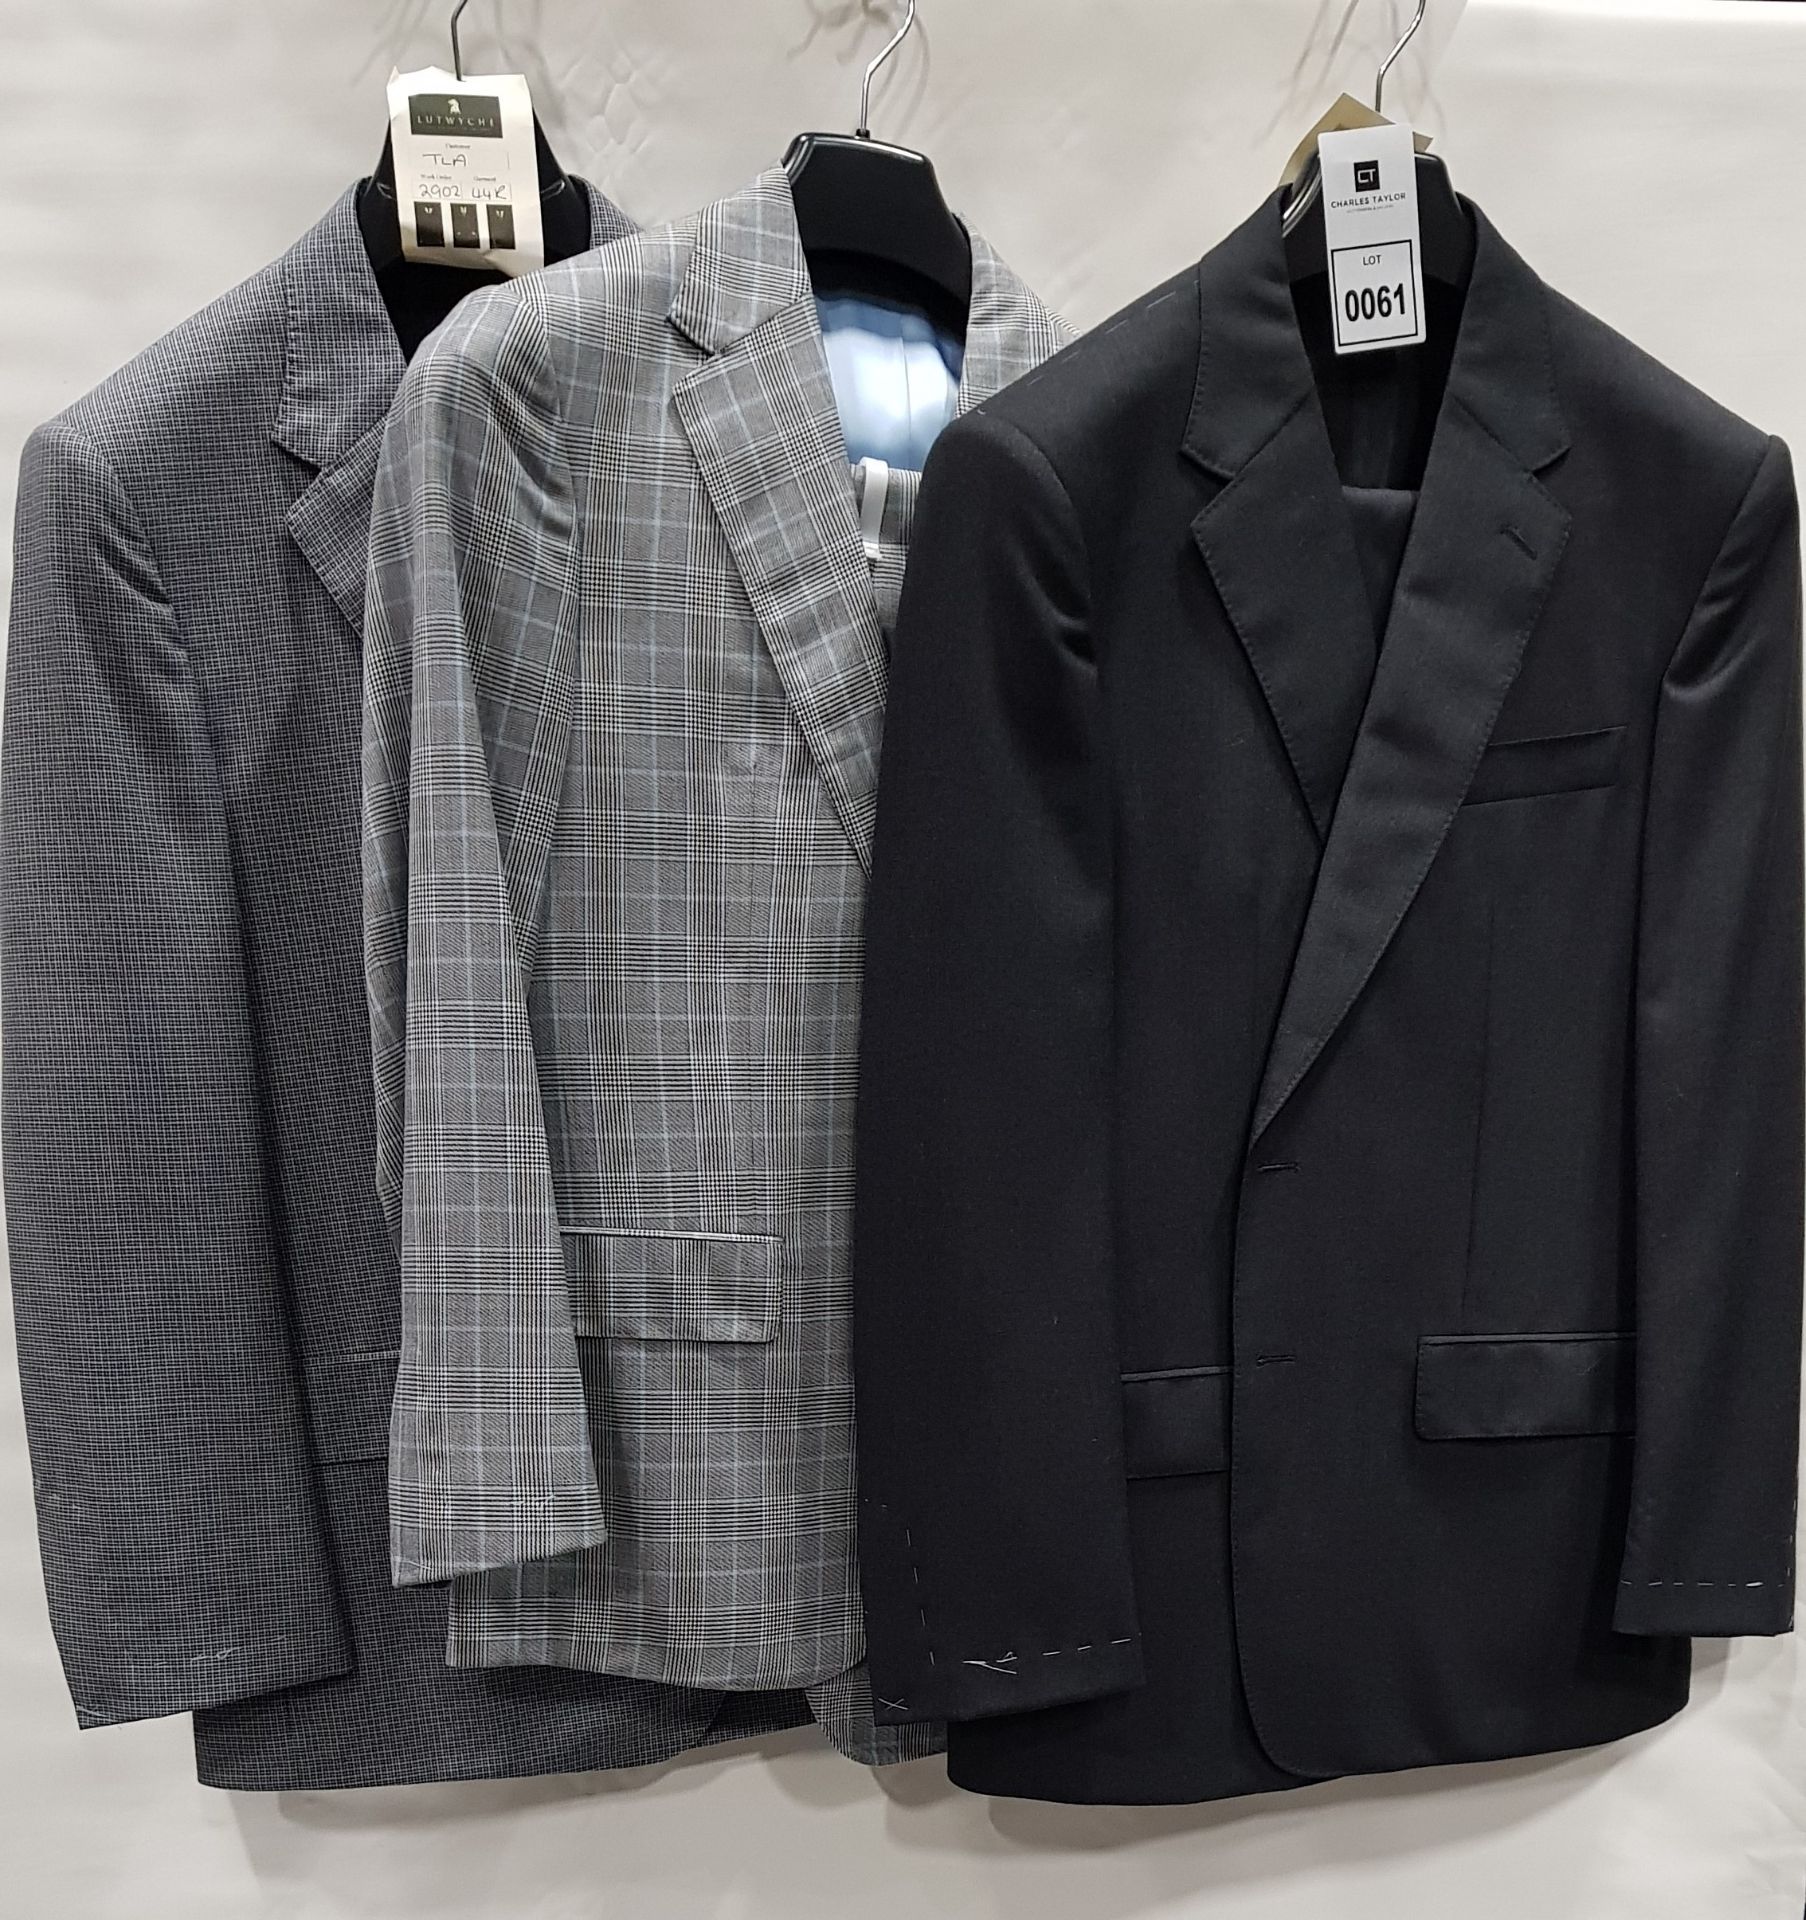 3 X BRAND NEW LUTWYCHE 2 PC GREY SHADES MATCHING SUITS SIZES 44R, 44R, 38R (NOTE NOT FULLY